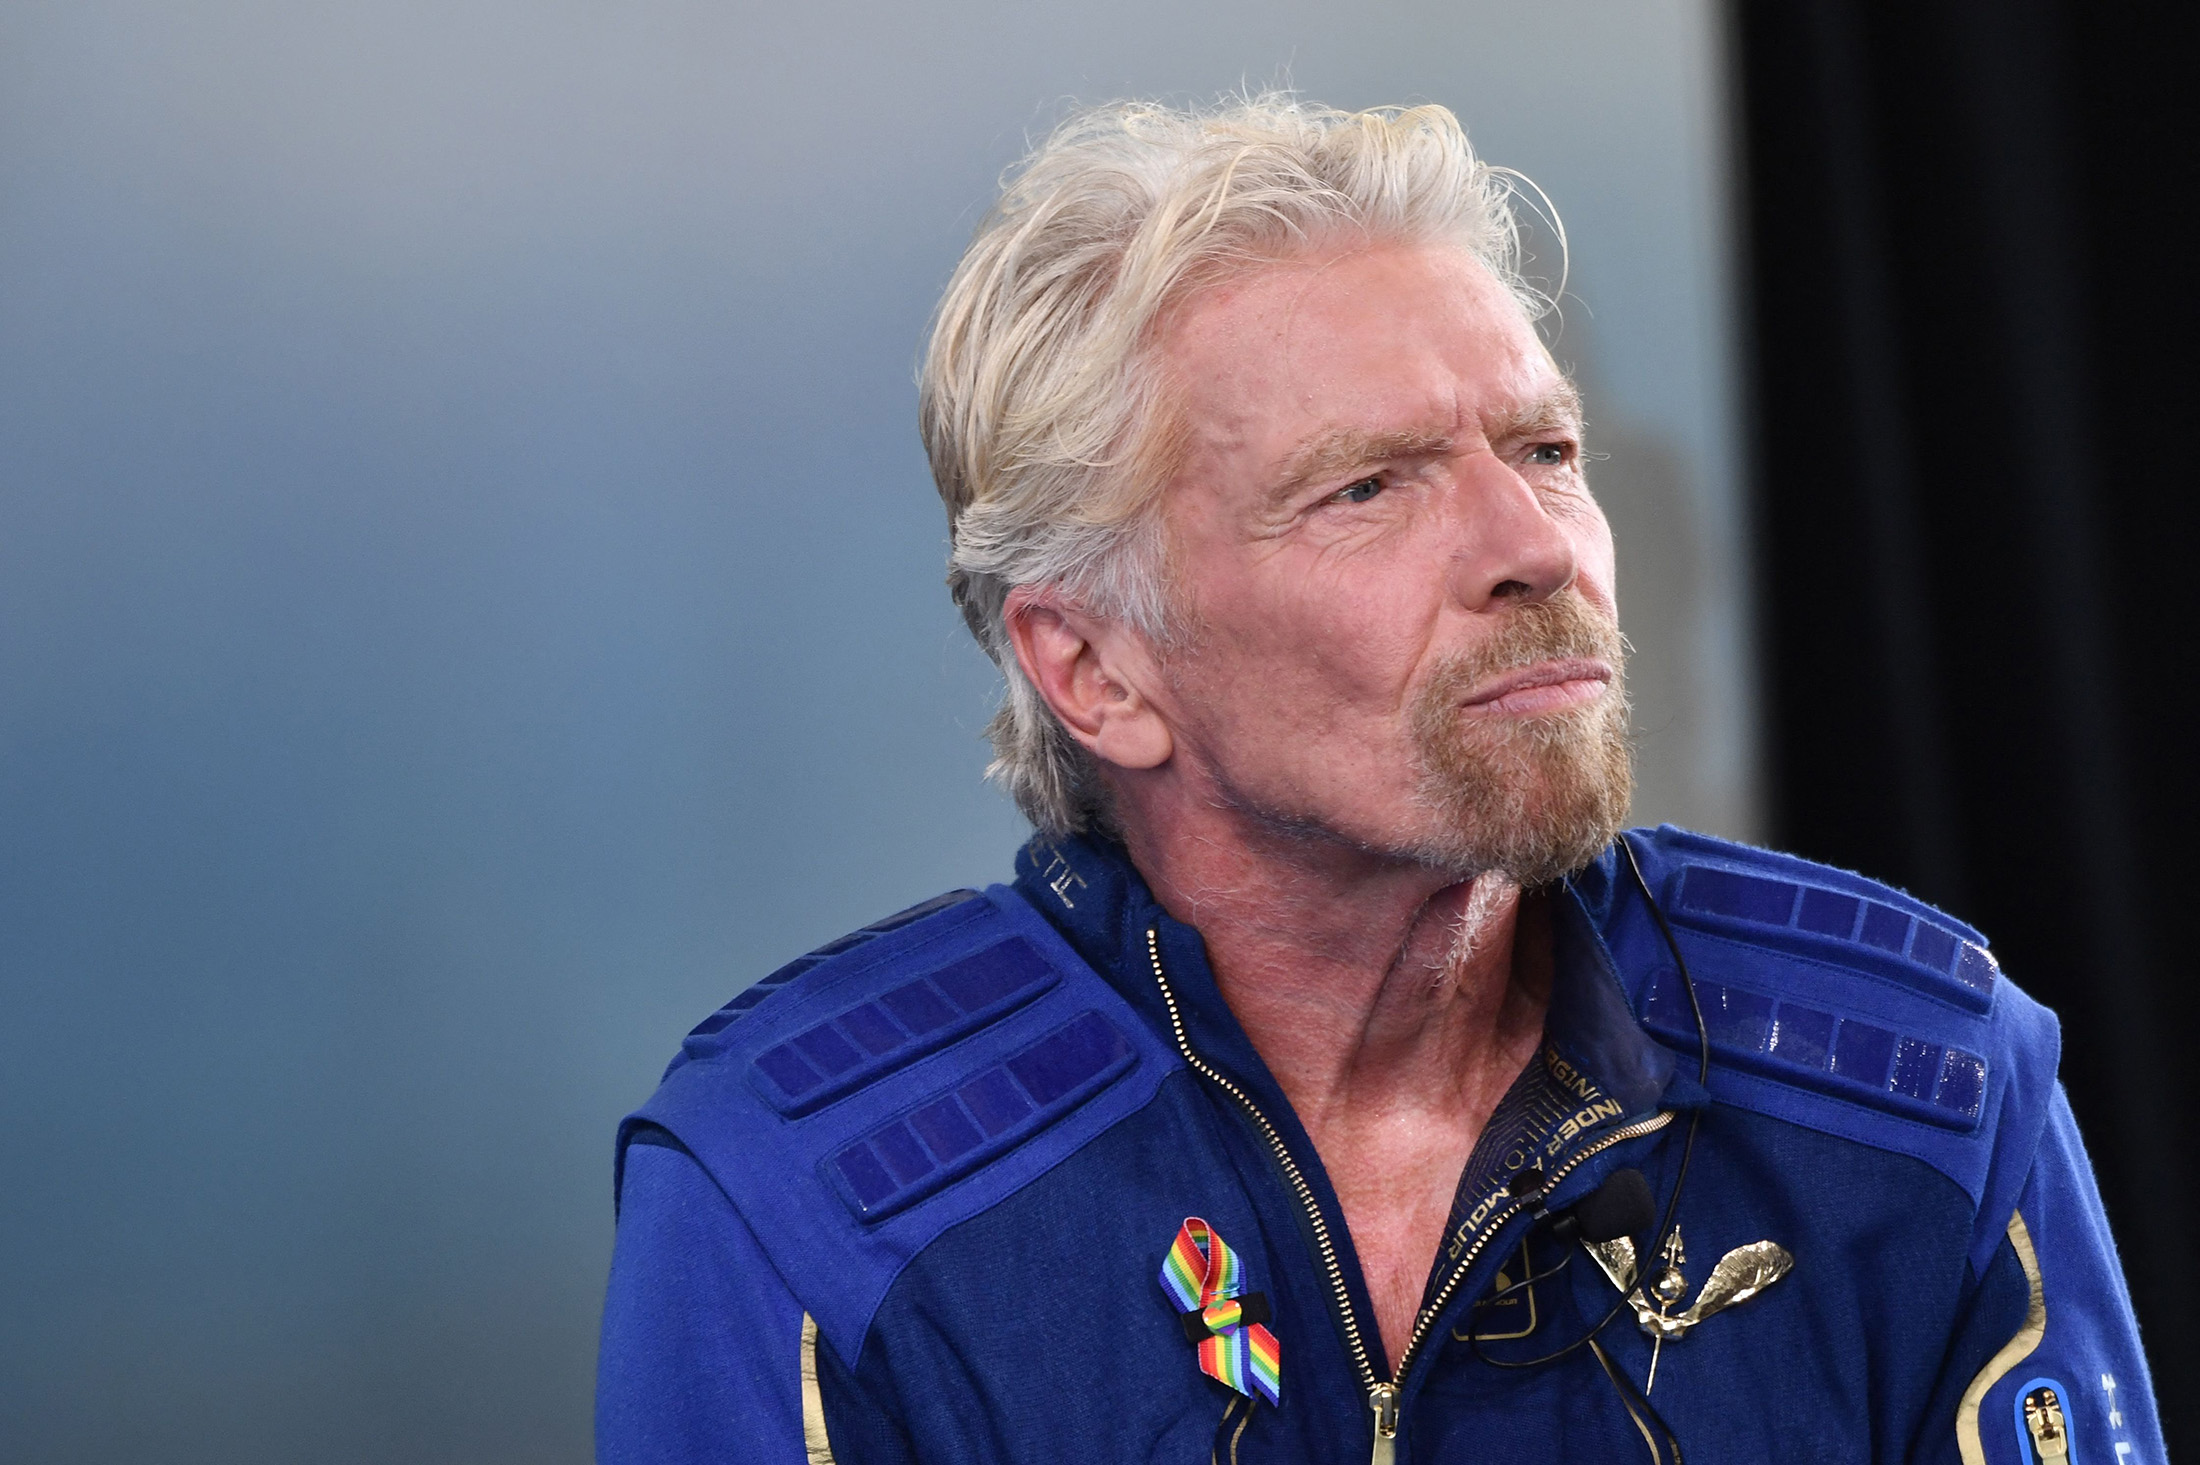 Richard Branson Launches A.I. Campaign to Help People With Dyslexia